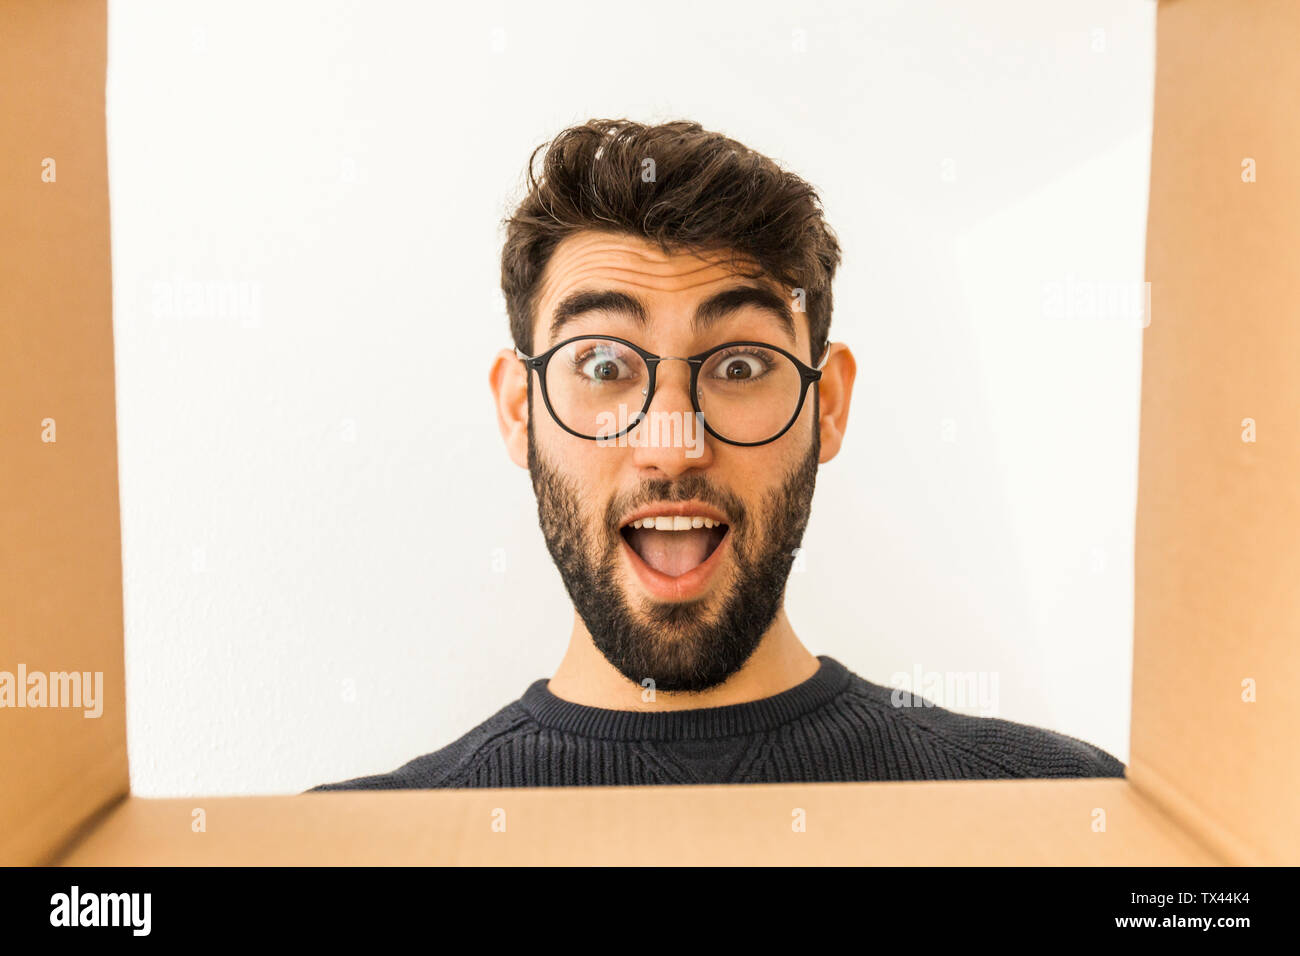 Portrait of surprised young man with beard and glasses looking into cardboard box Stock Photo